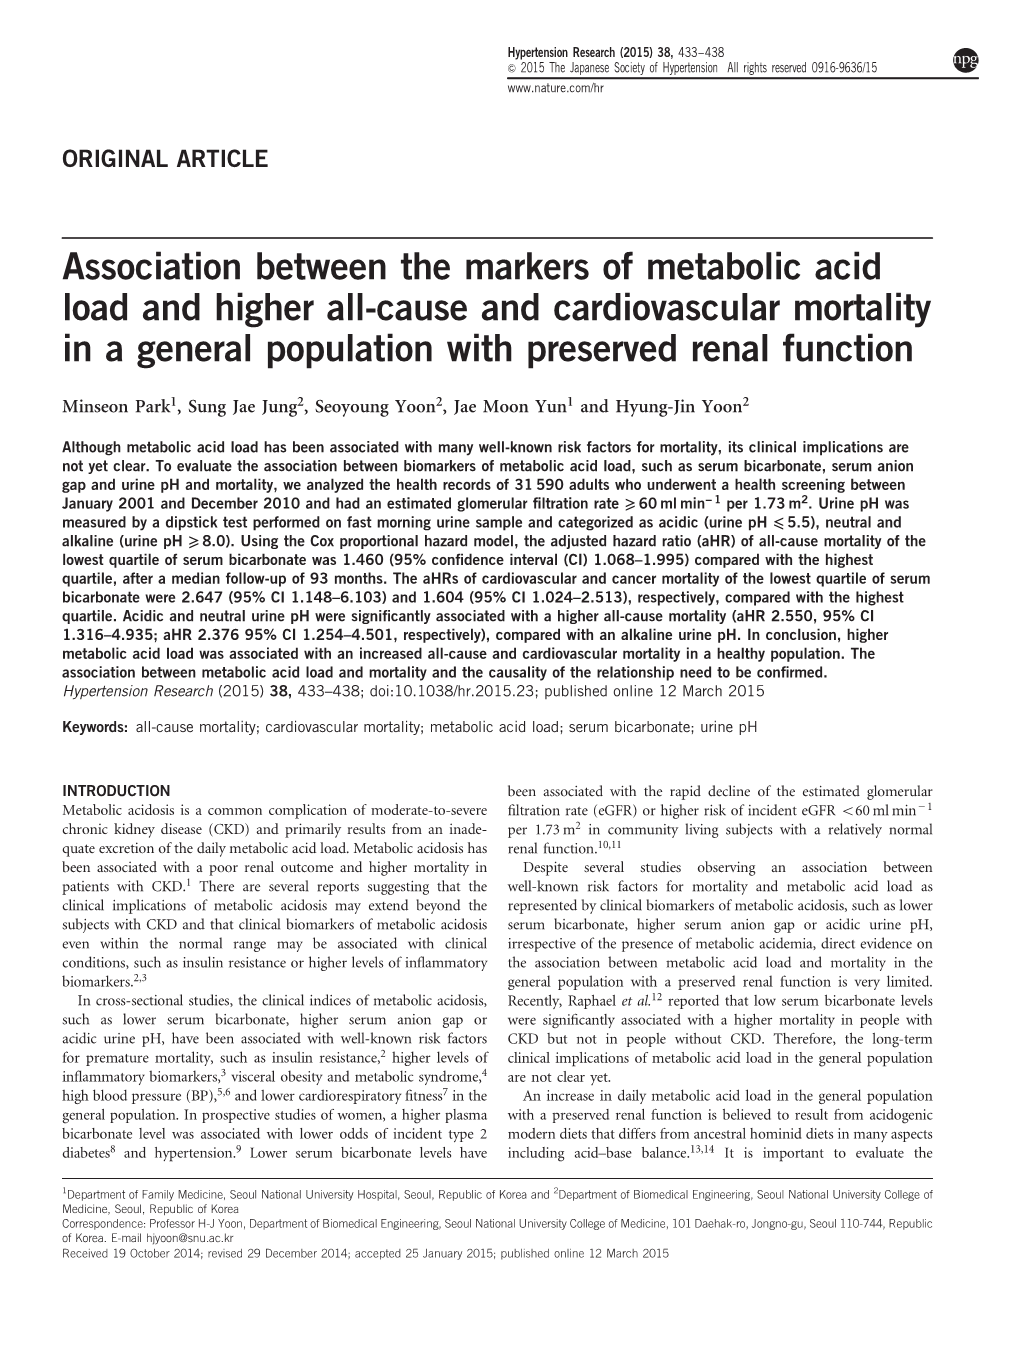 Association Between the Markers of Metabolic Acid Load and Higher All-Cause and Cardiovascular Mortality in a General Population with Preserved Renal Function